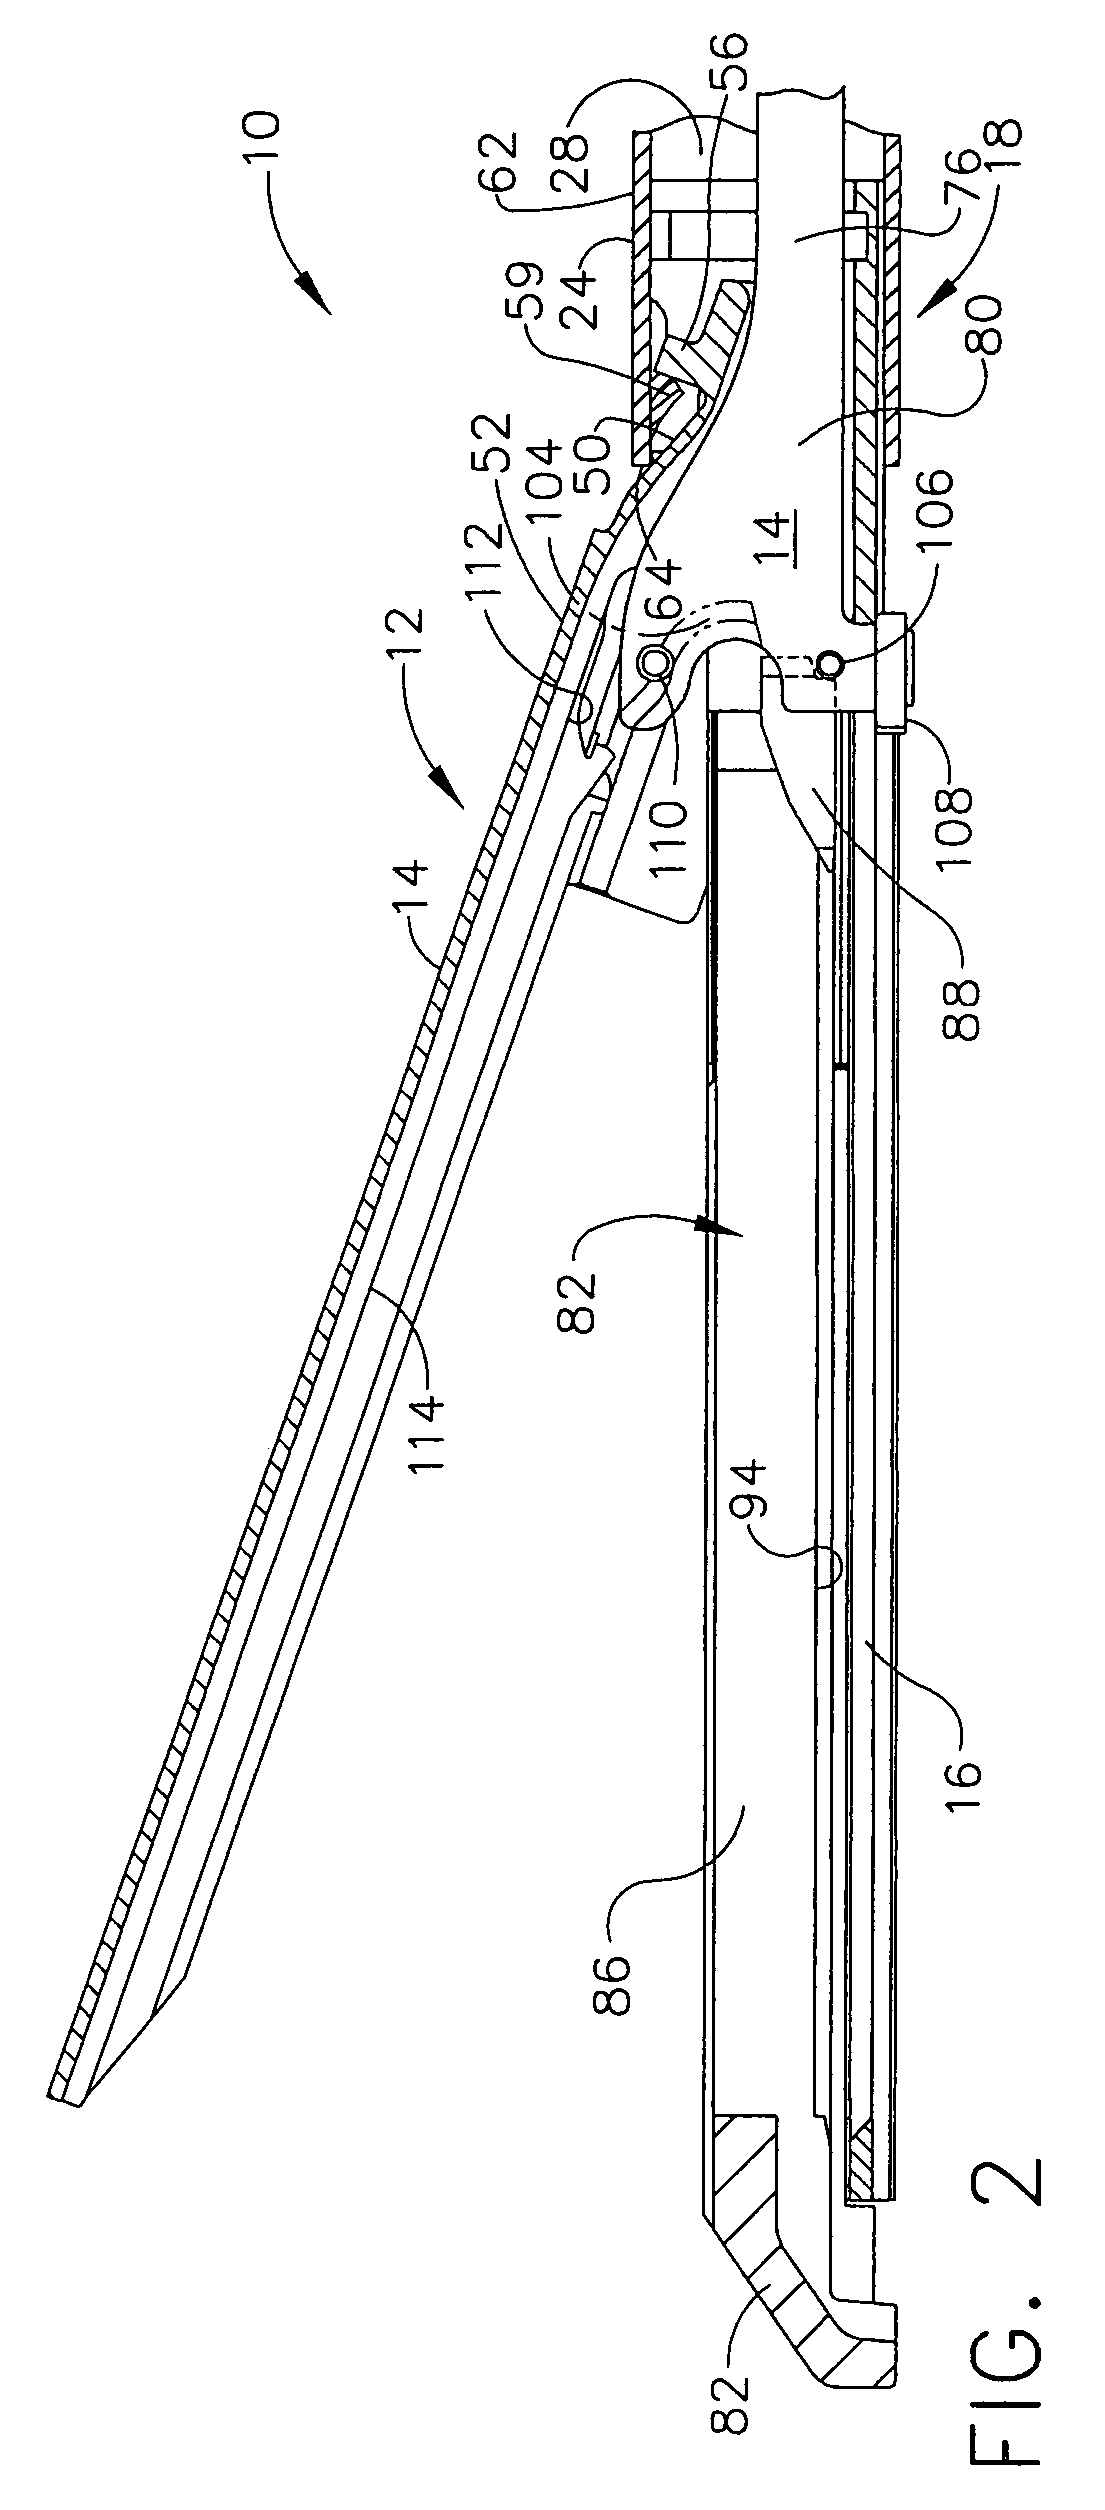 Surgical stapling and cutting instrument with travel-indicating retraction member